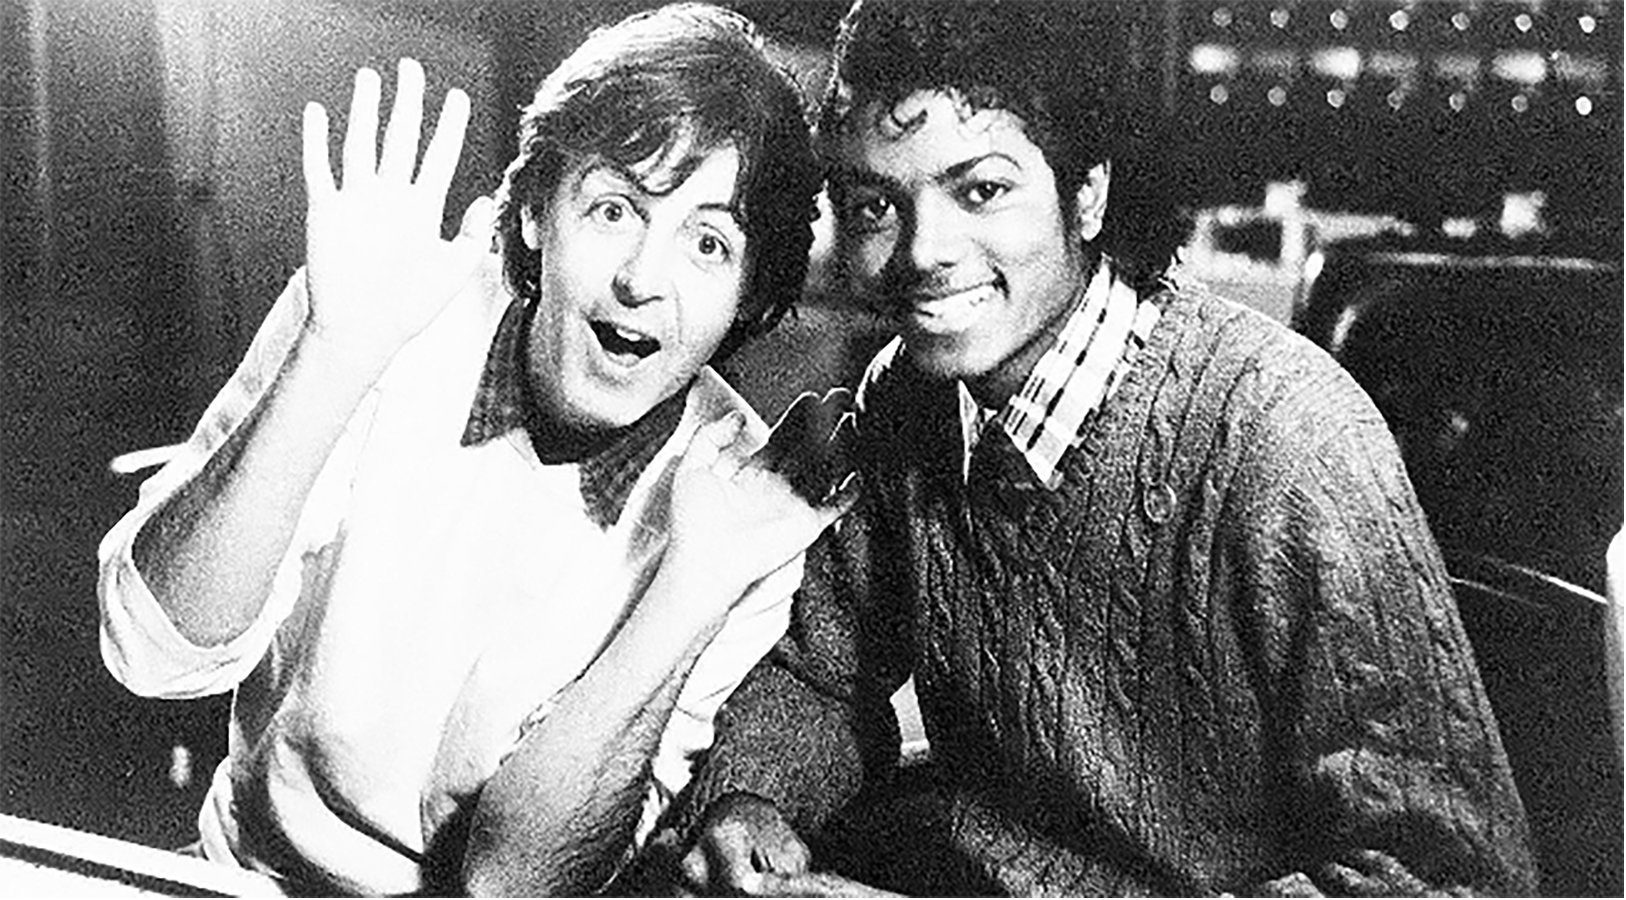 Paul McCartney on his Collaboration With Michael Jackson in the 1980s